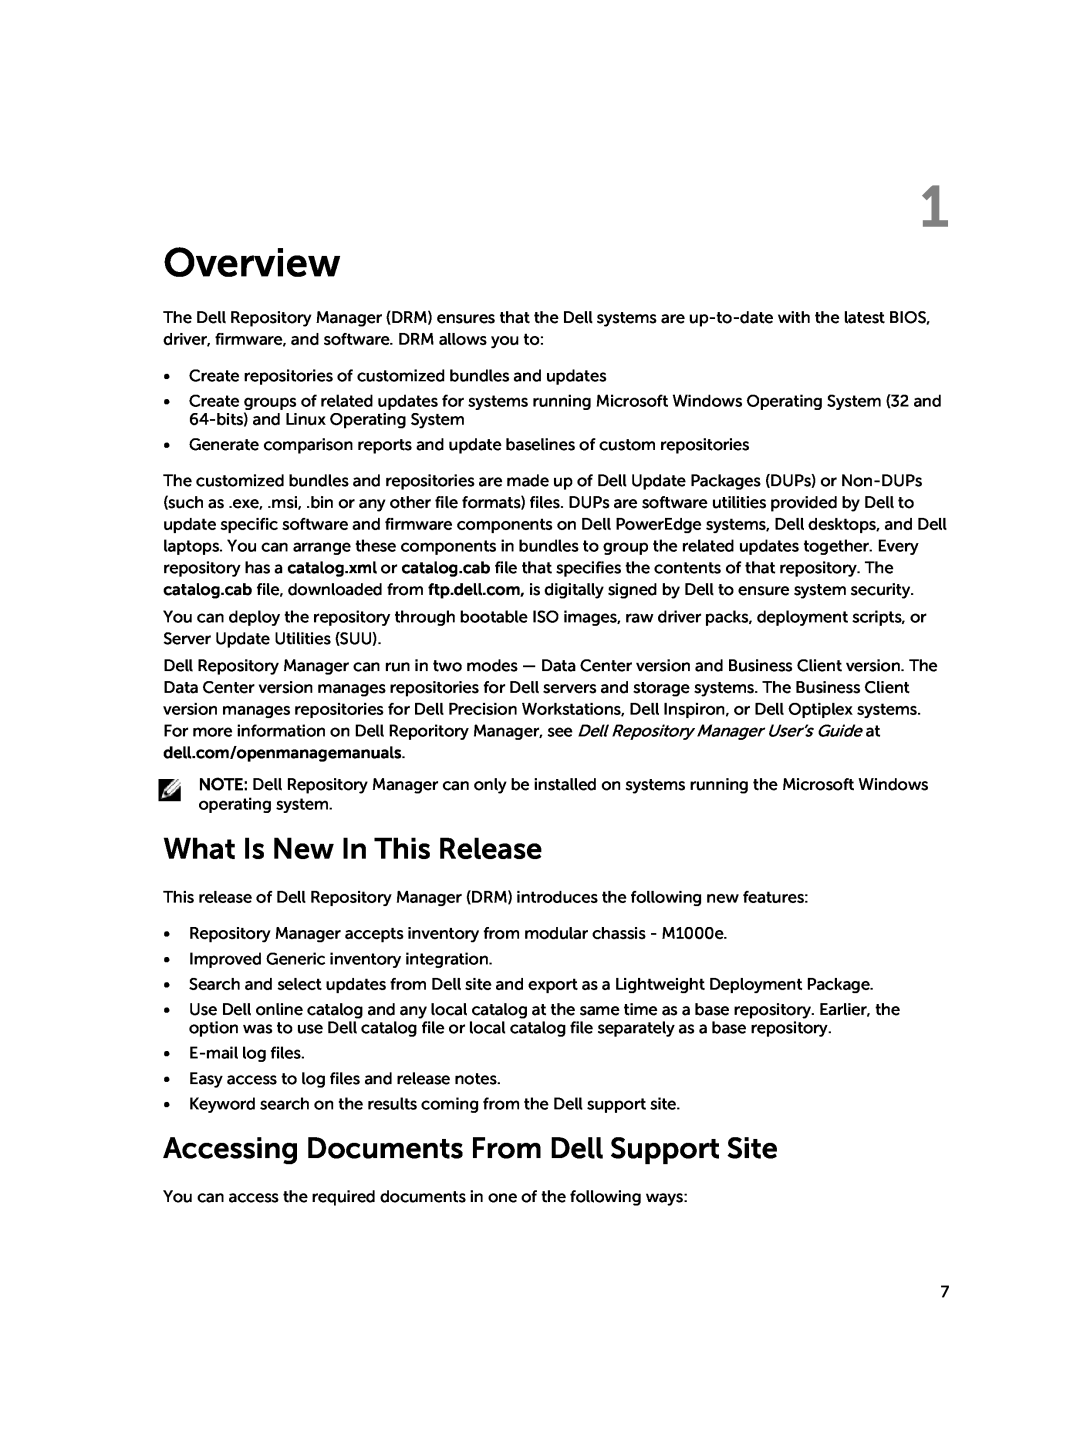 Dell 1.8 manual Overview, What Is New In This Release, Accessing Documents From Dell Support Site 